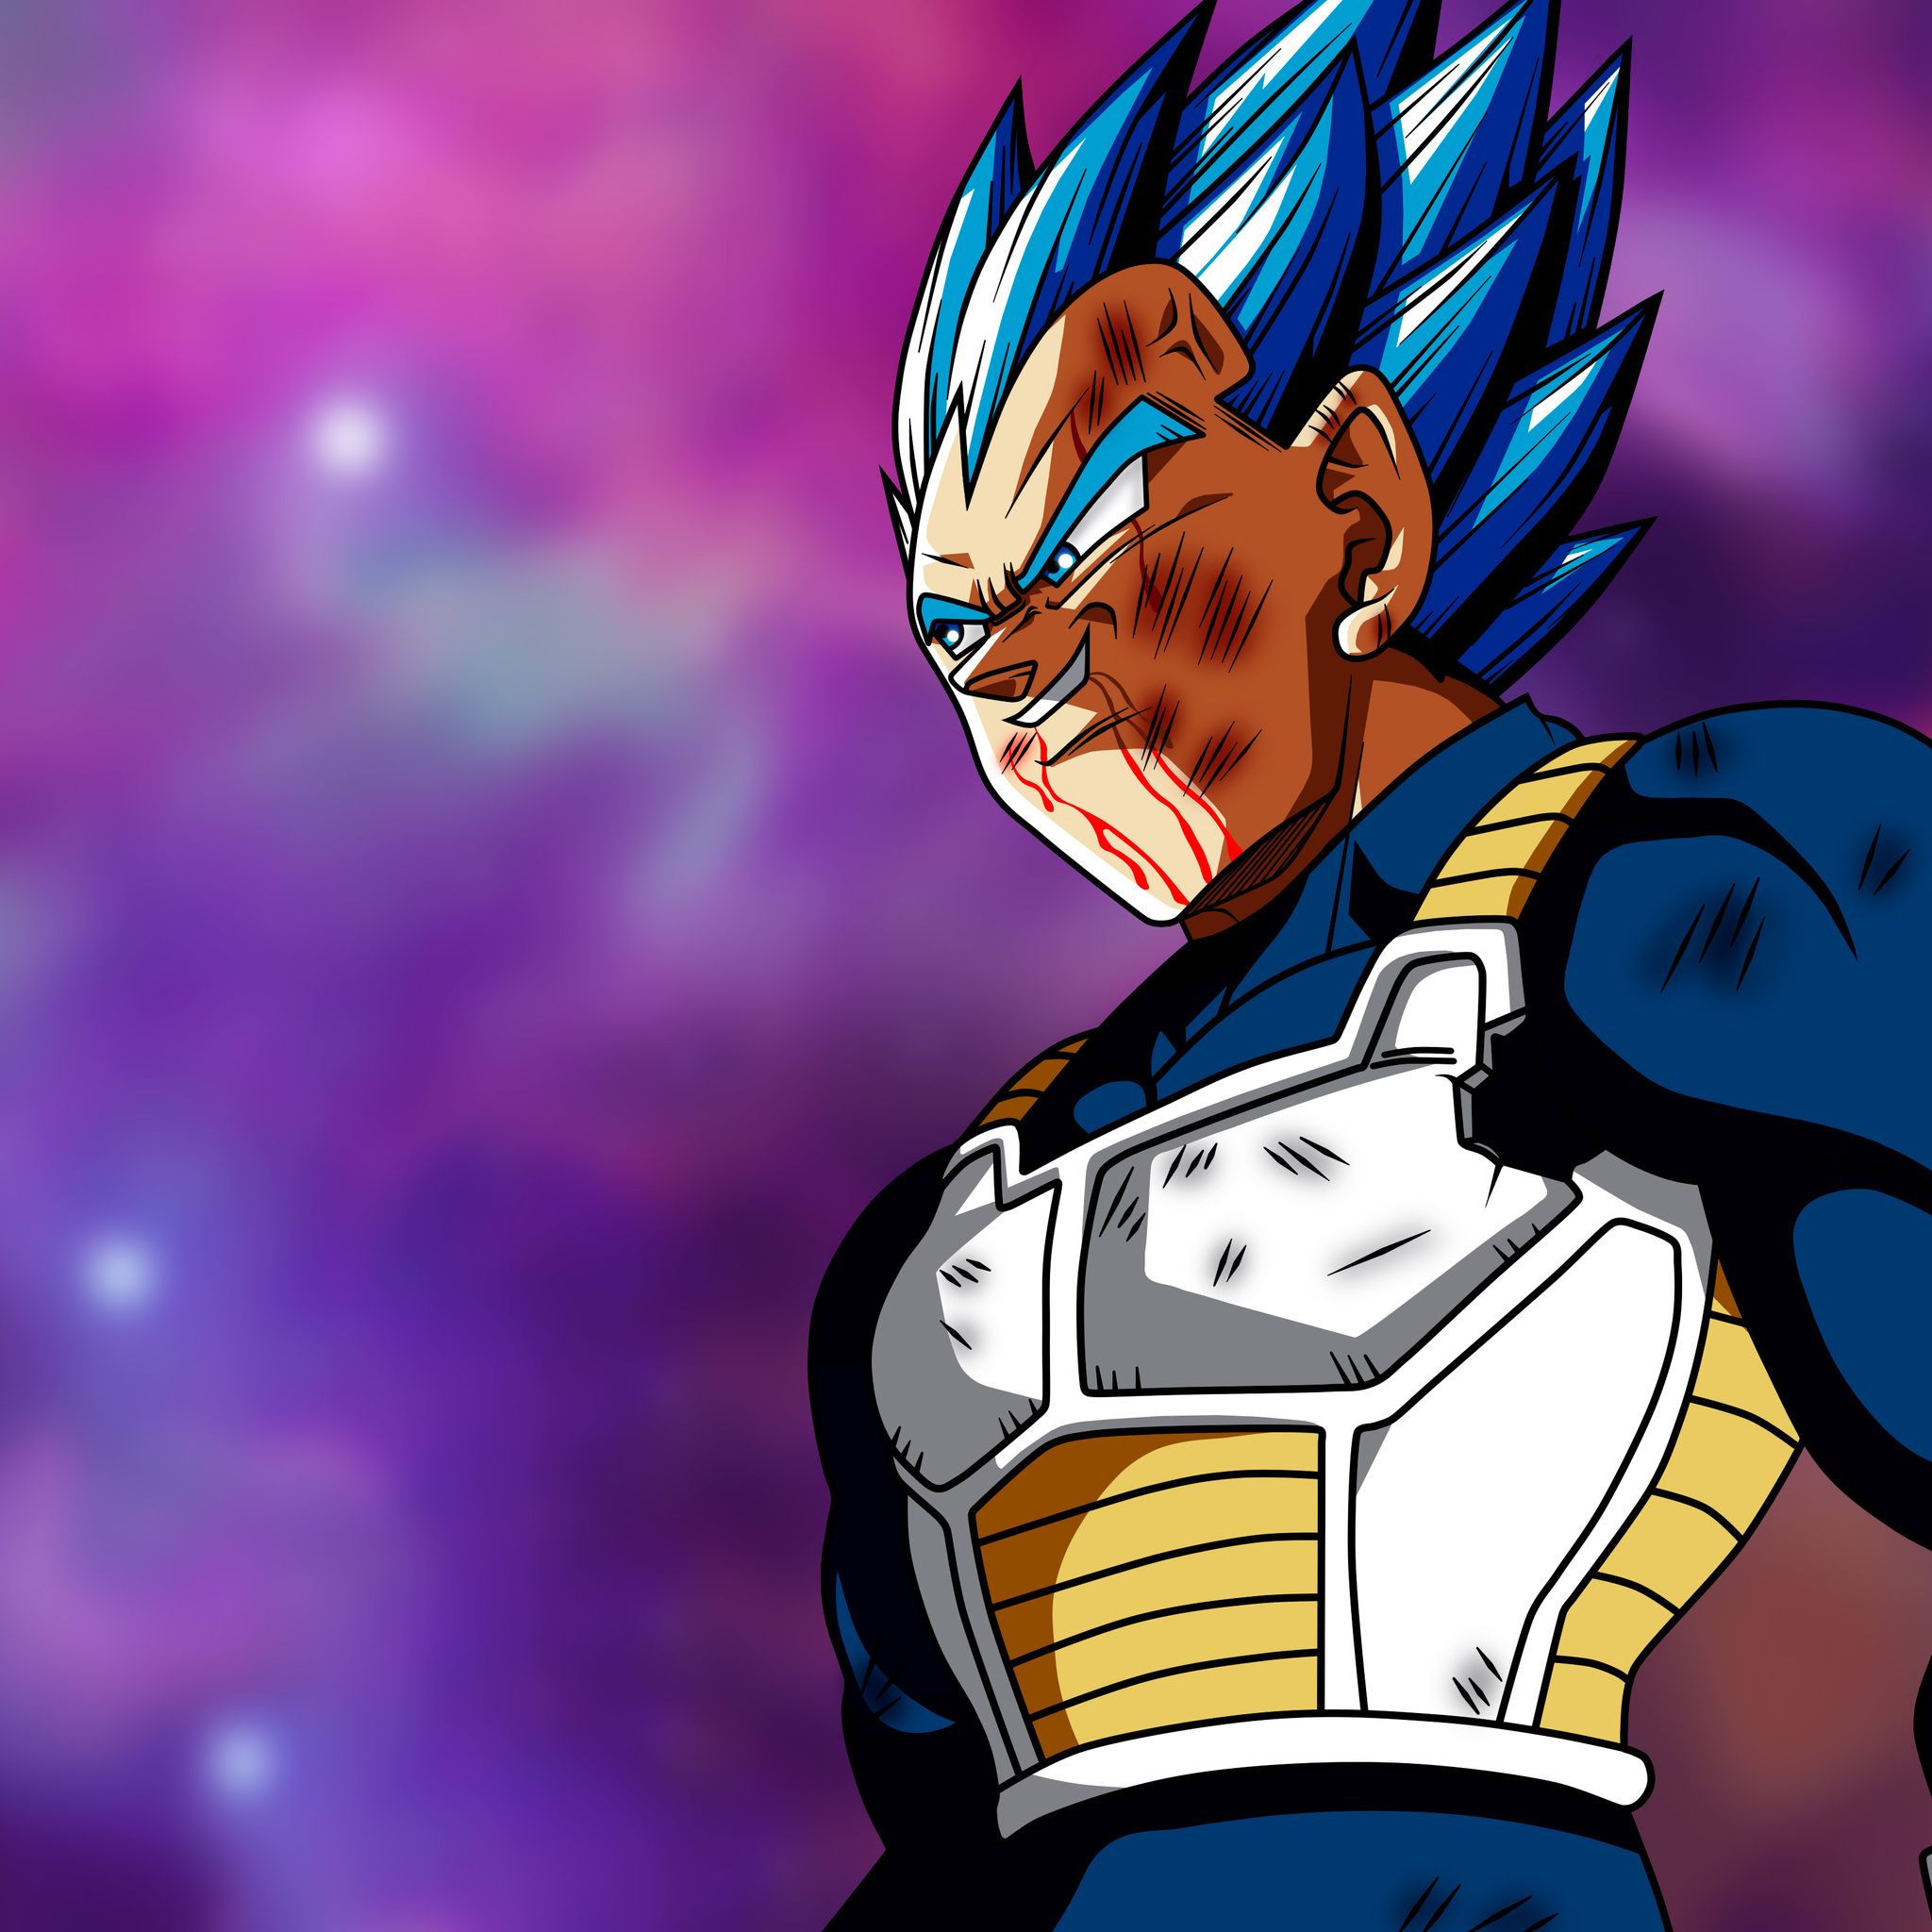 Dragon Ball Super Vegeta iPad Air HD 4k Wallpaper, Image, Background, Photo and Picture